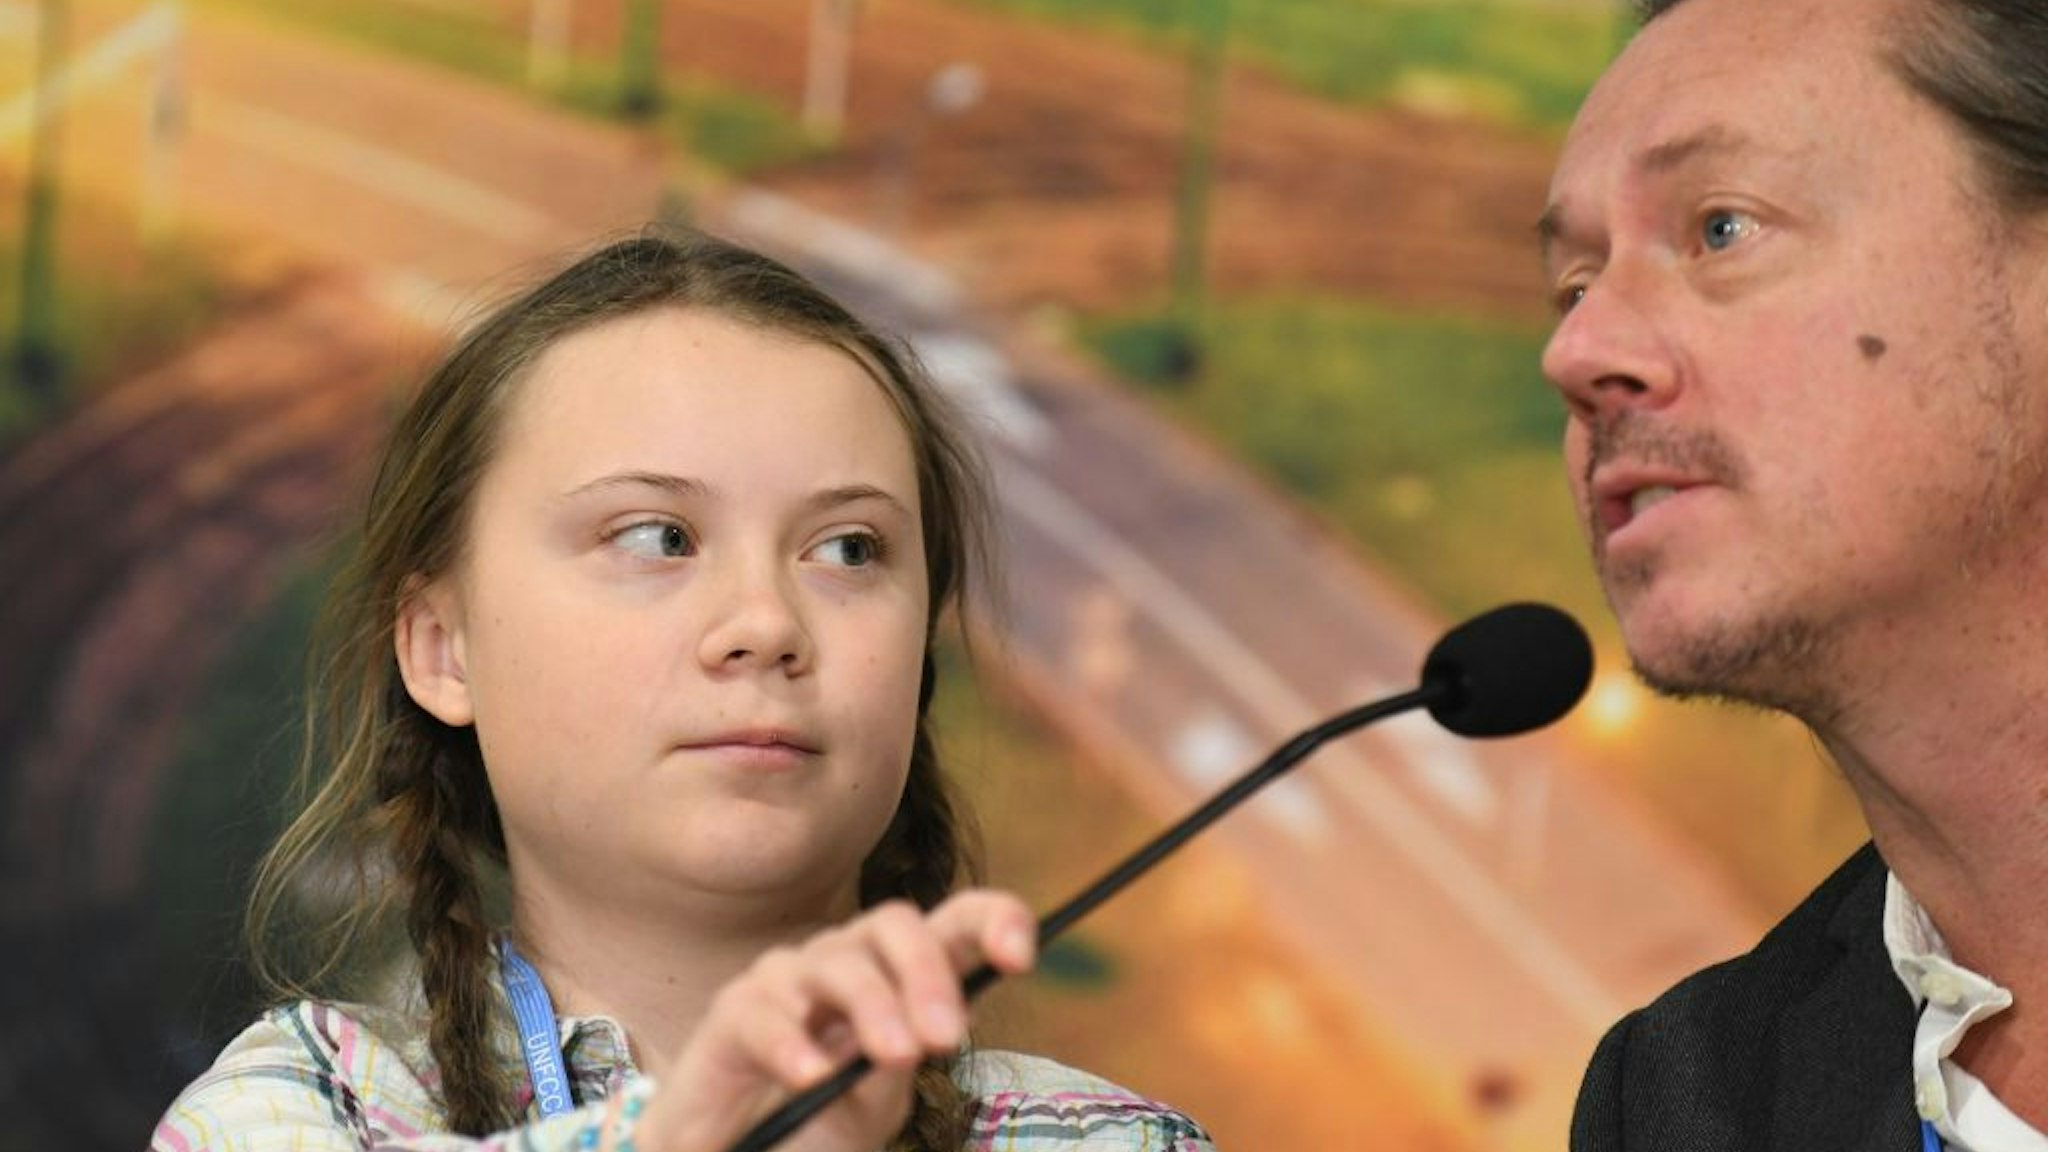 Swedish 15-year old climate activist, Greta Thunberg and her father Svante attend a press conference during the COP24 summit on climate change in Katowice, Poland, on December 04, 2018.